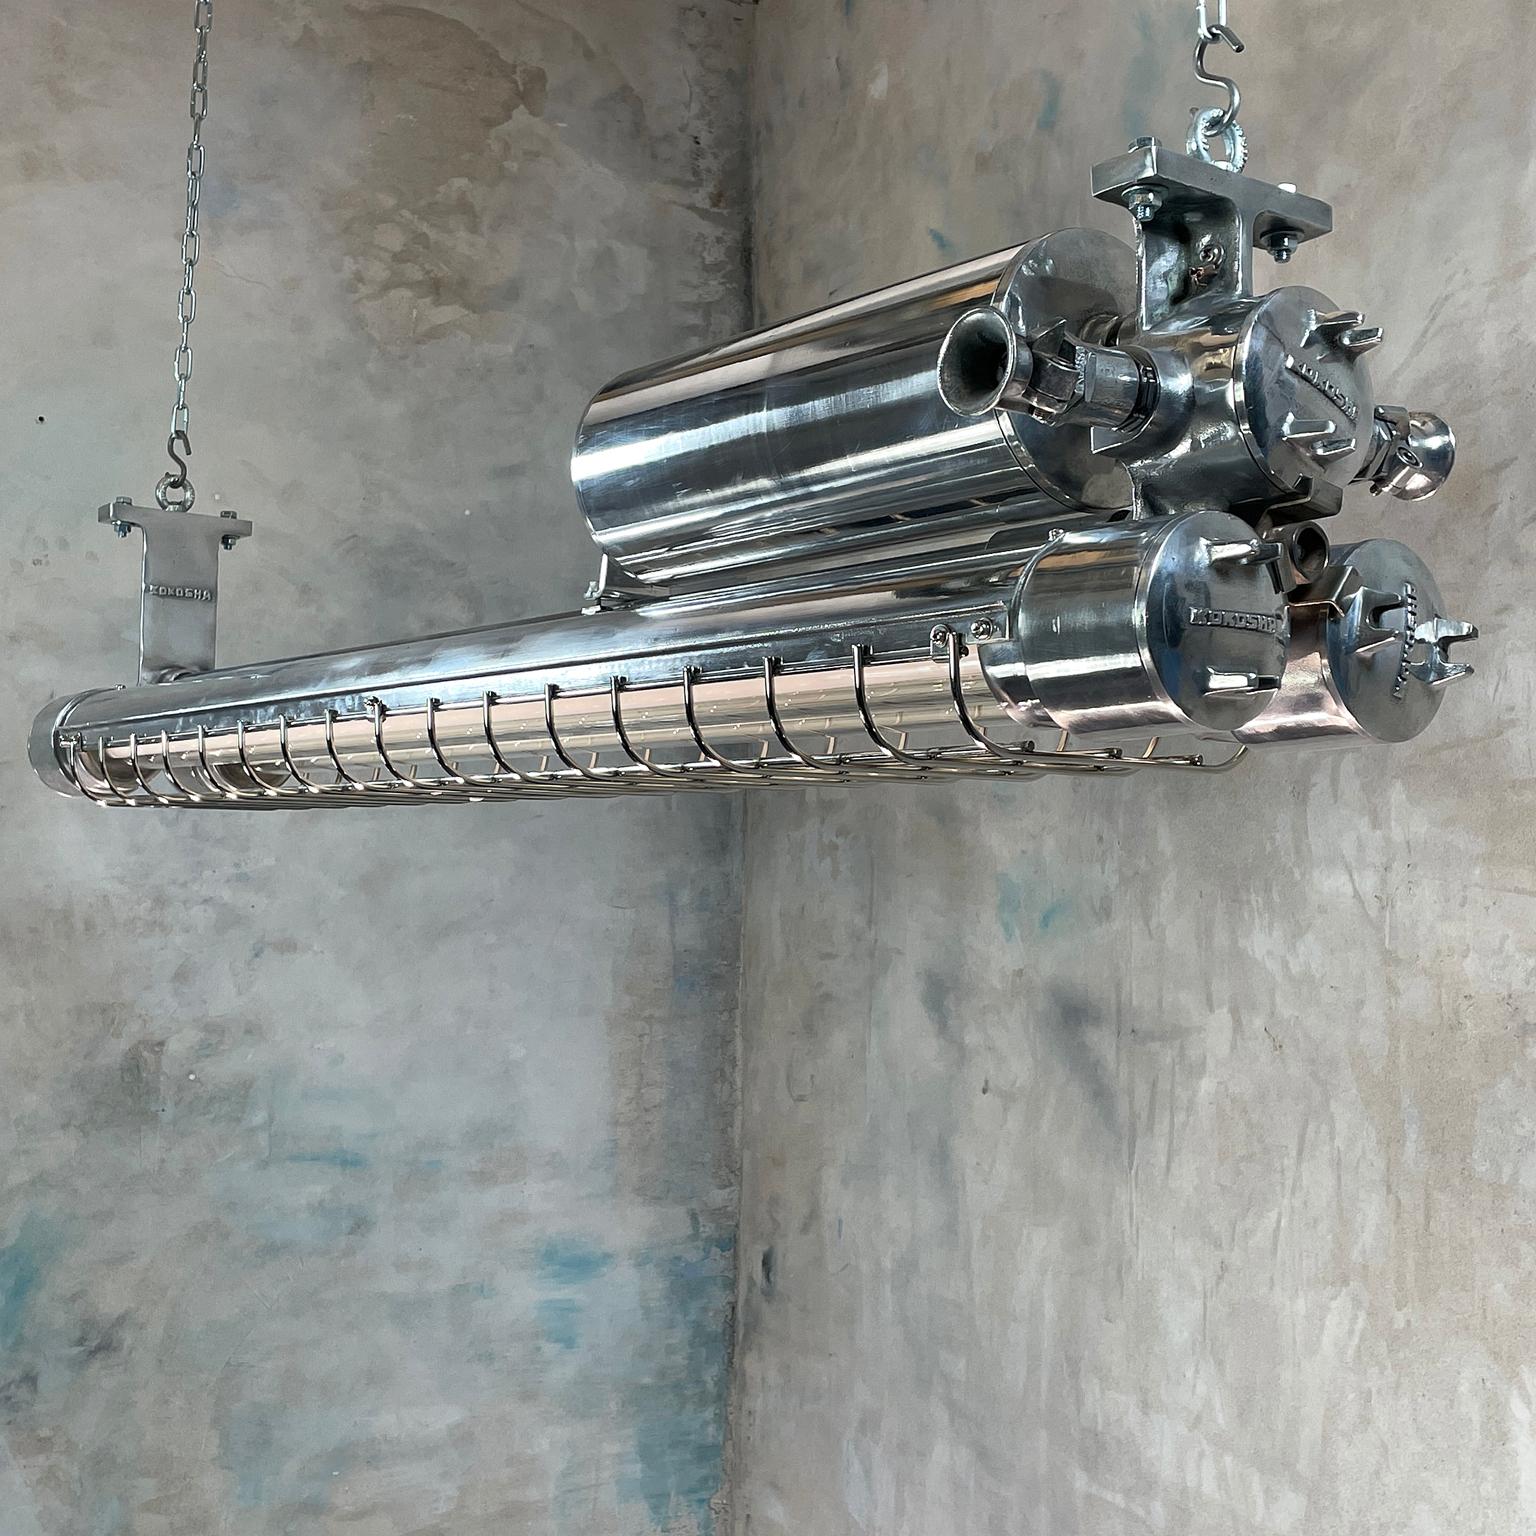 Vintage Industrial flameproof ceiling tube light as seen in the movie Star Wars 'The Force awakens'. Measure: 4ft

Designed and manufactured by Kokosha of Osaka Japan. Originally designed for use on supertankers and military vessels. These lights